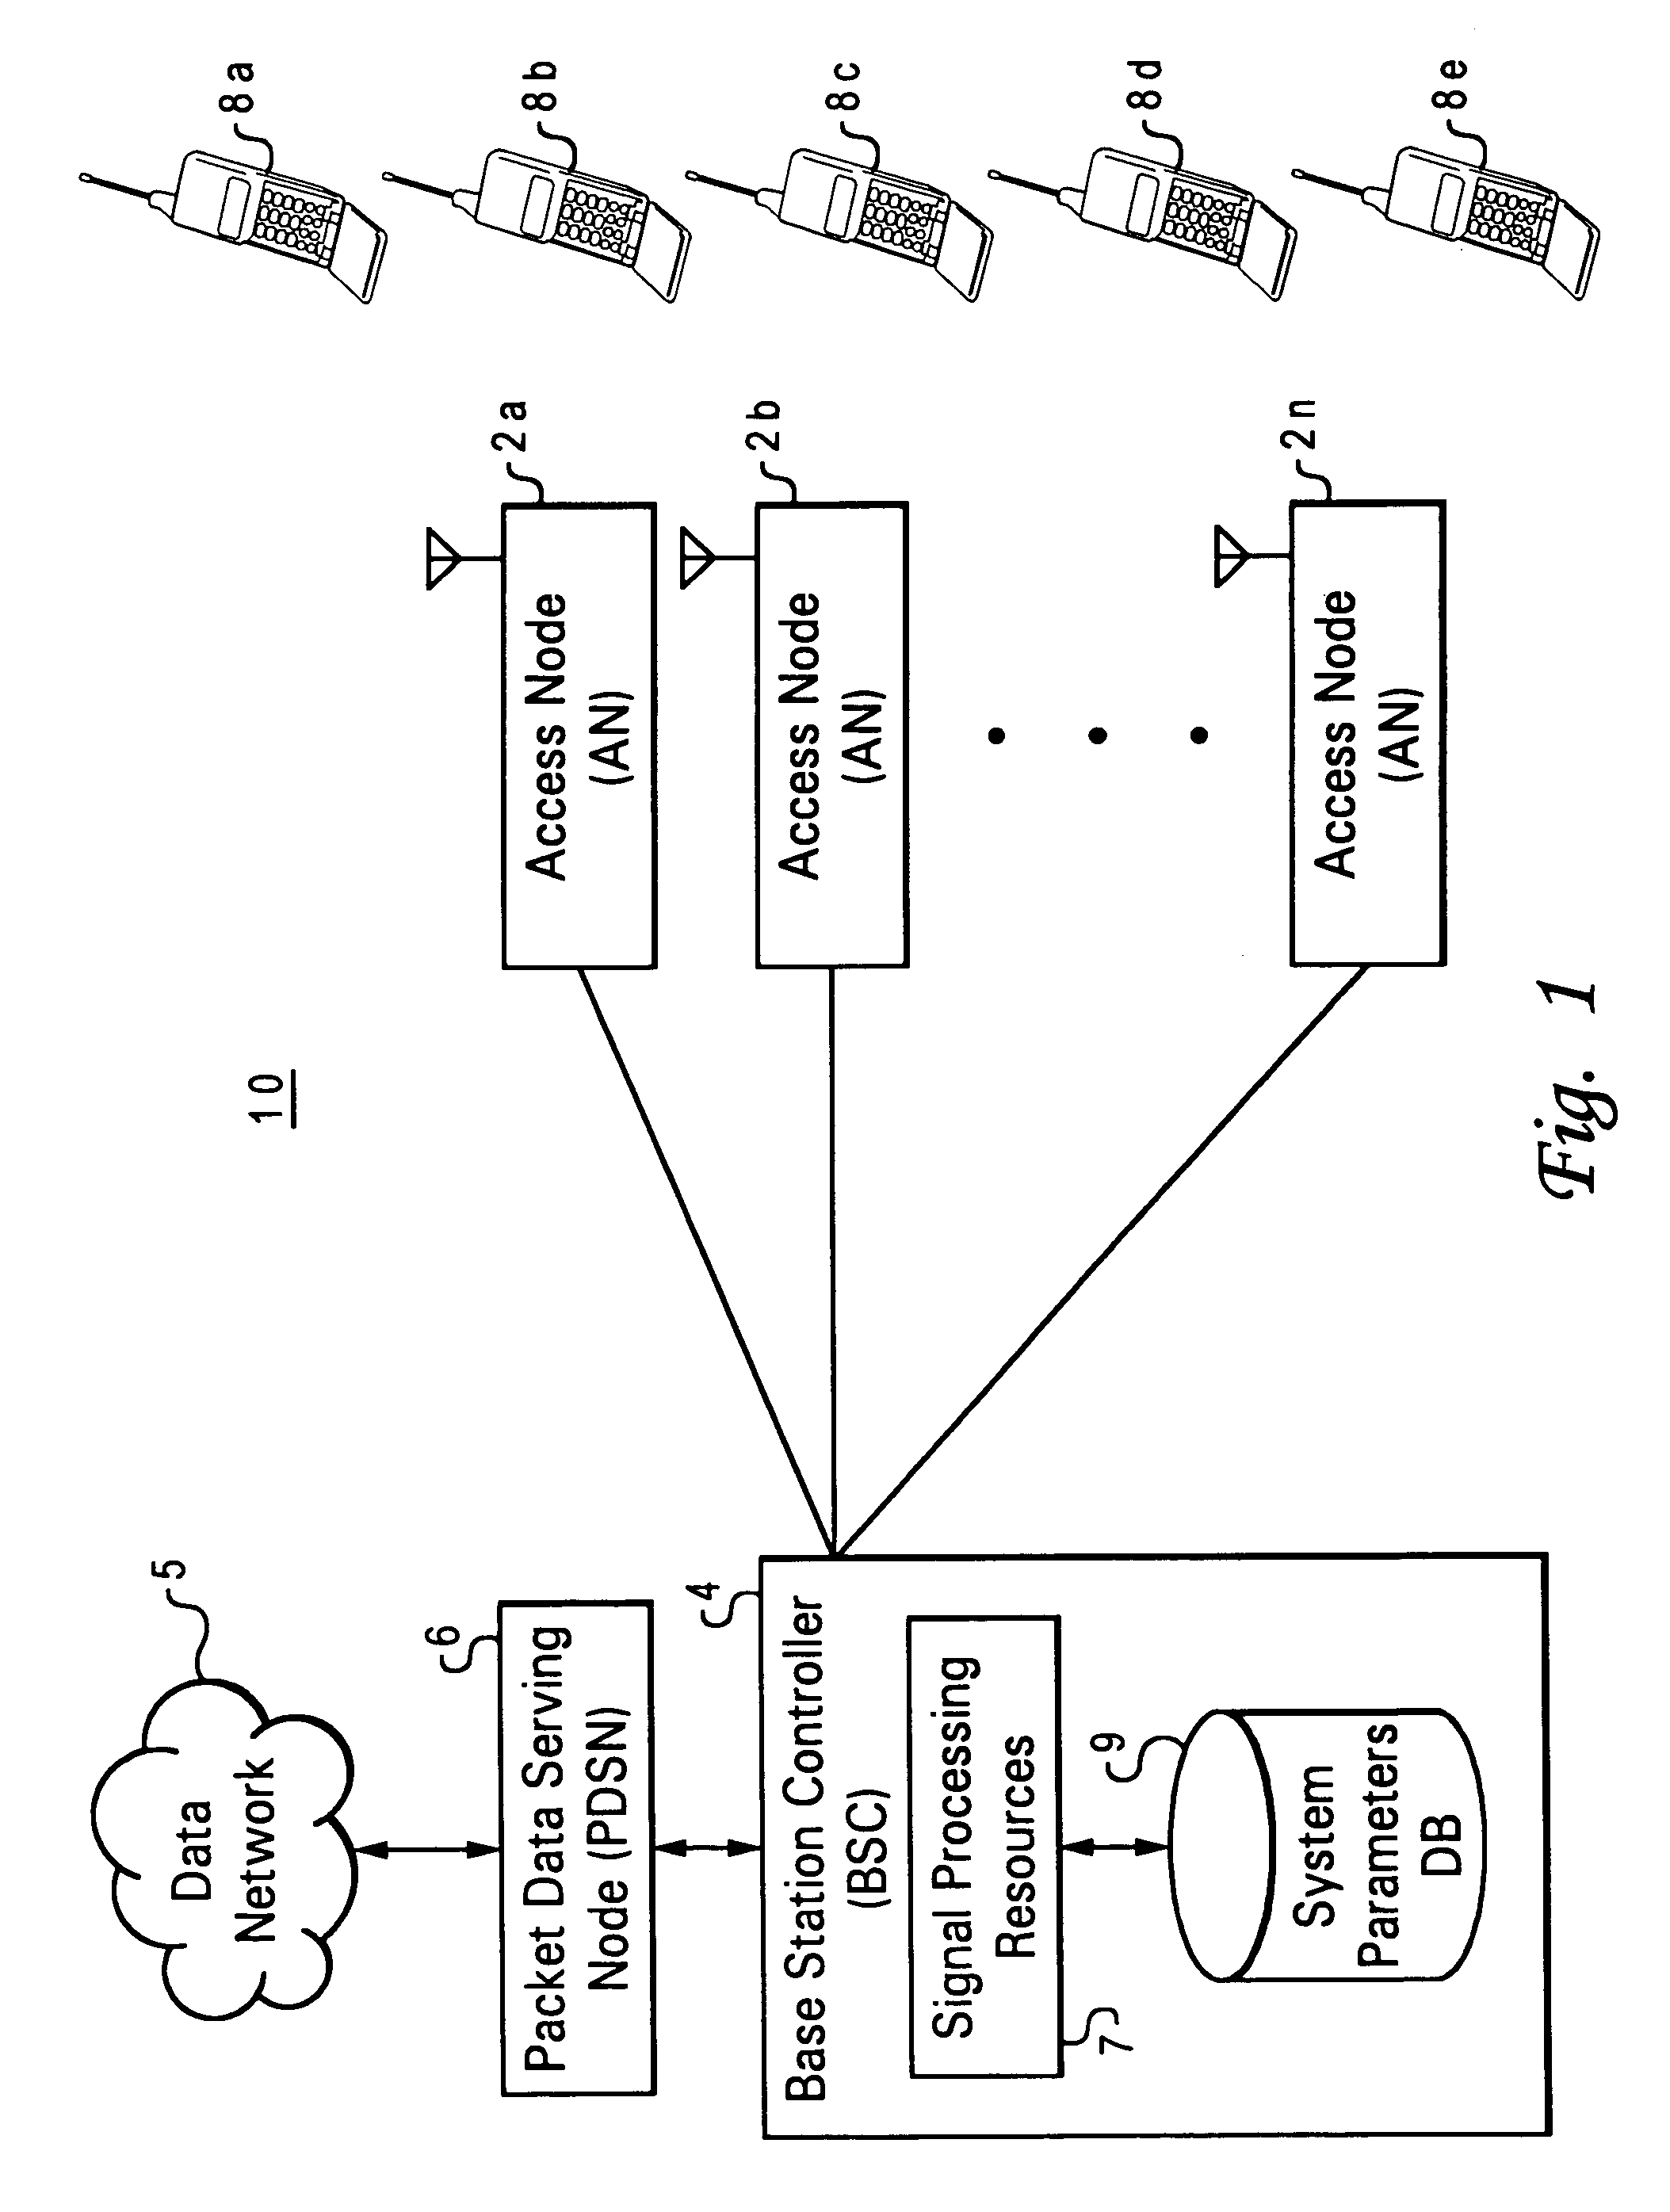 Adaptive data rate control for mobile data transfer for high throughput and guaranteed error rate